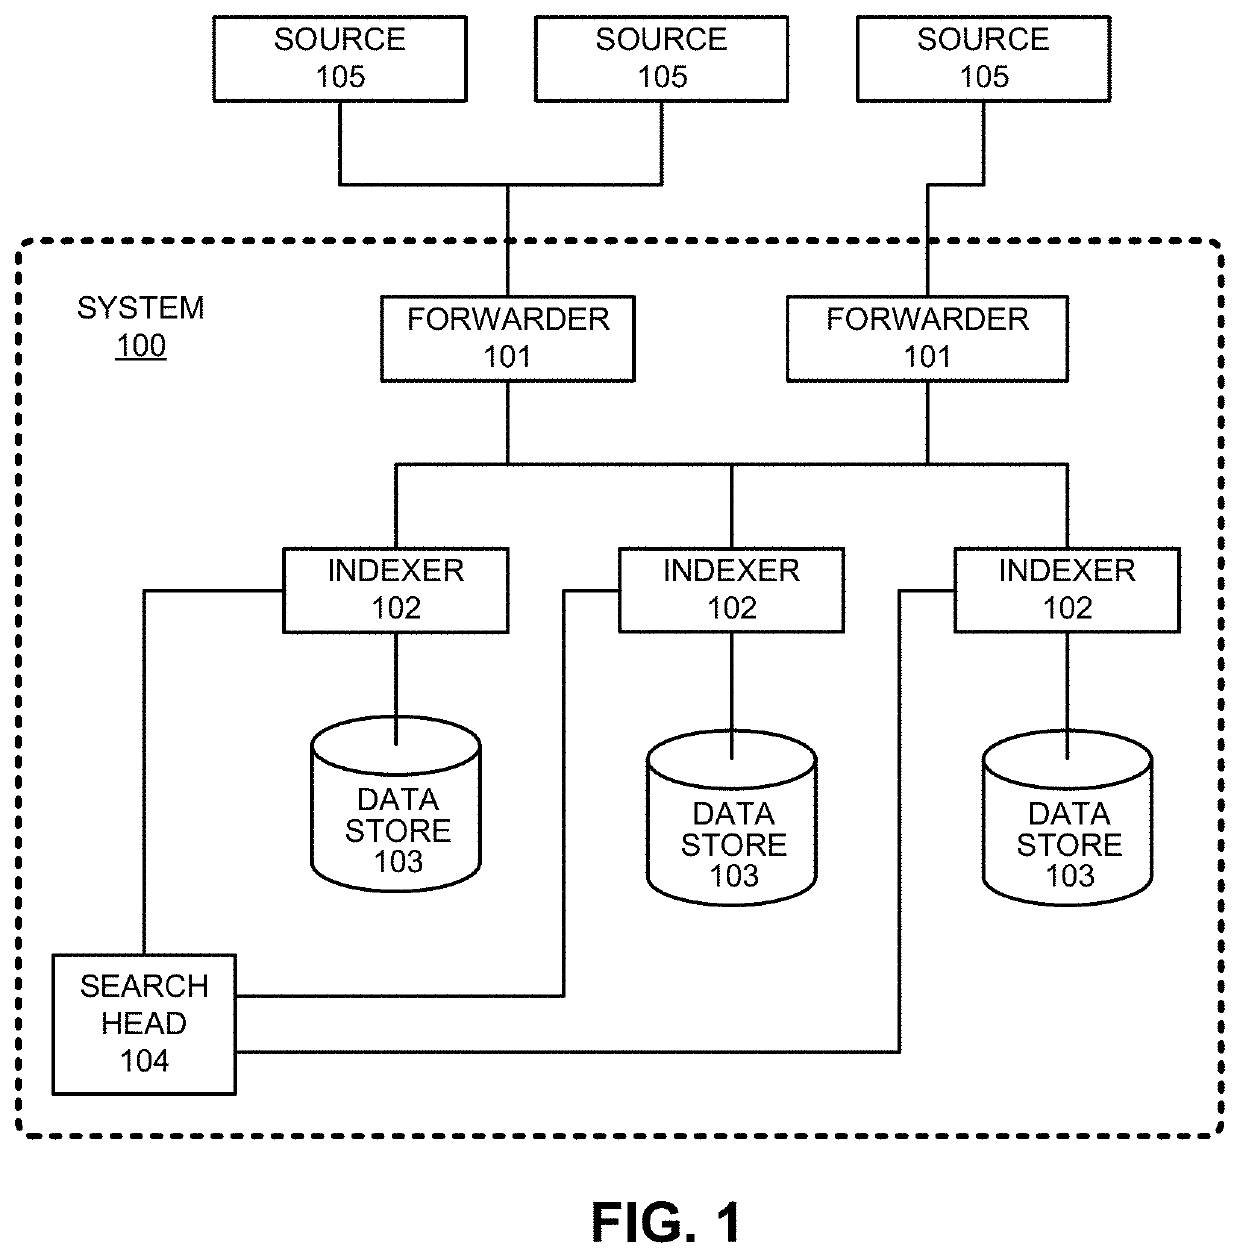 Linking event streams across applications of a data intake and query system